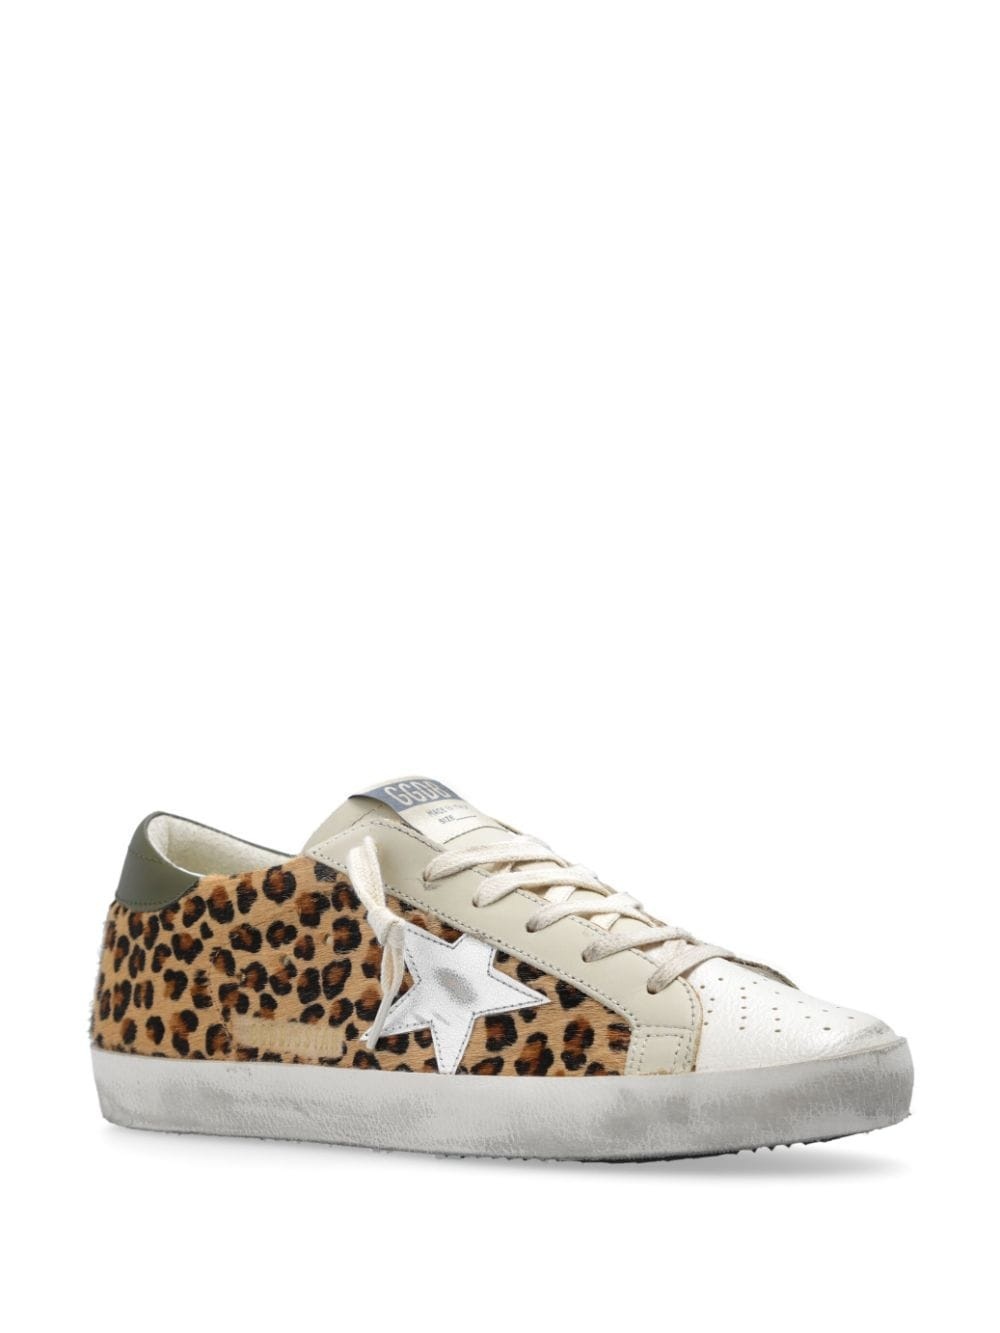 Golden Goose Super Star Leather Sneakers - 5